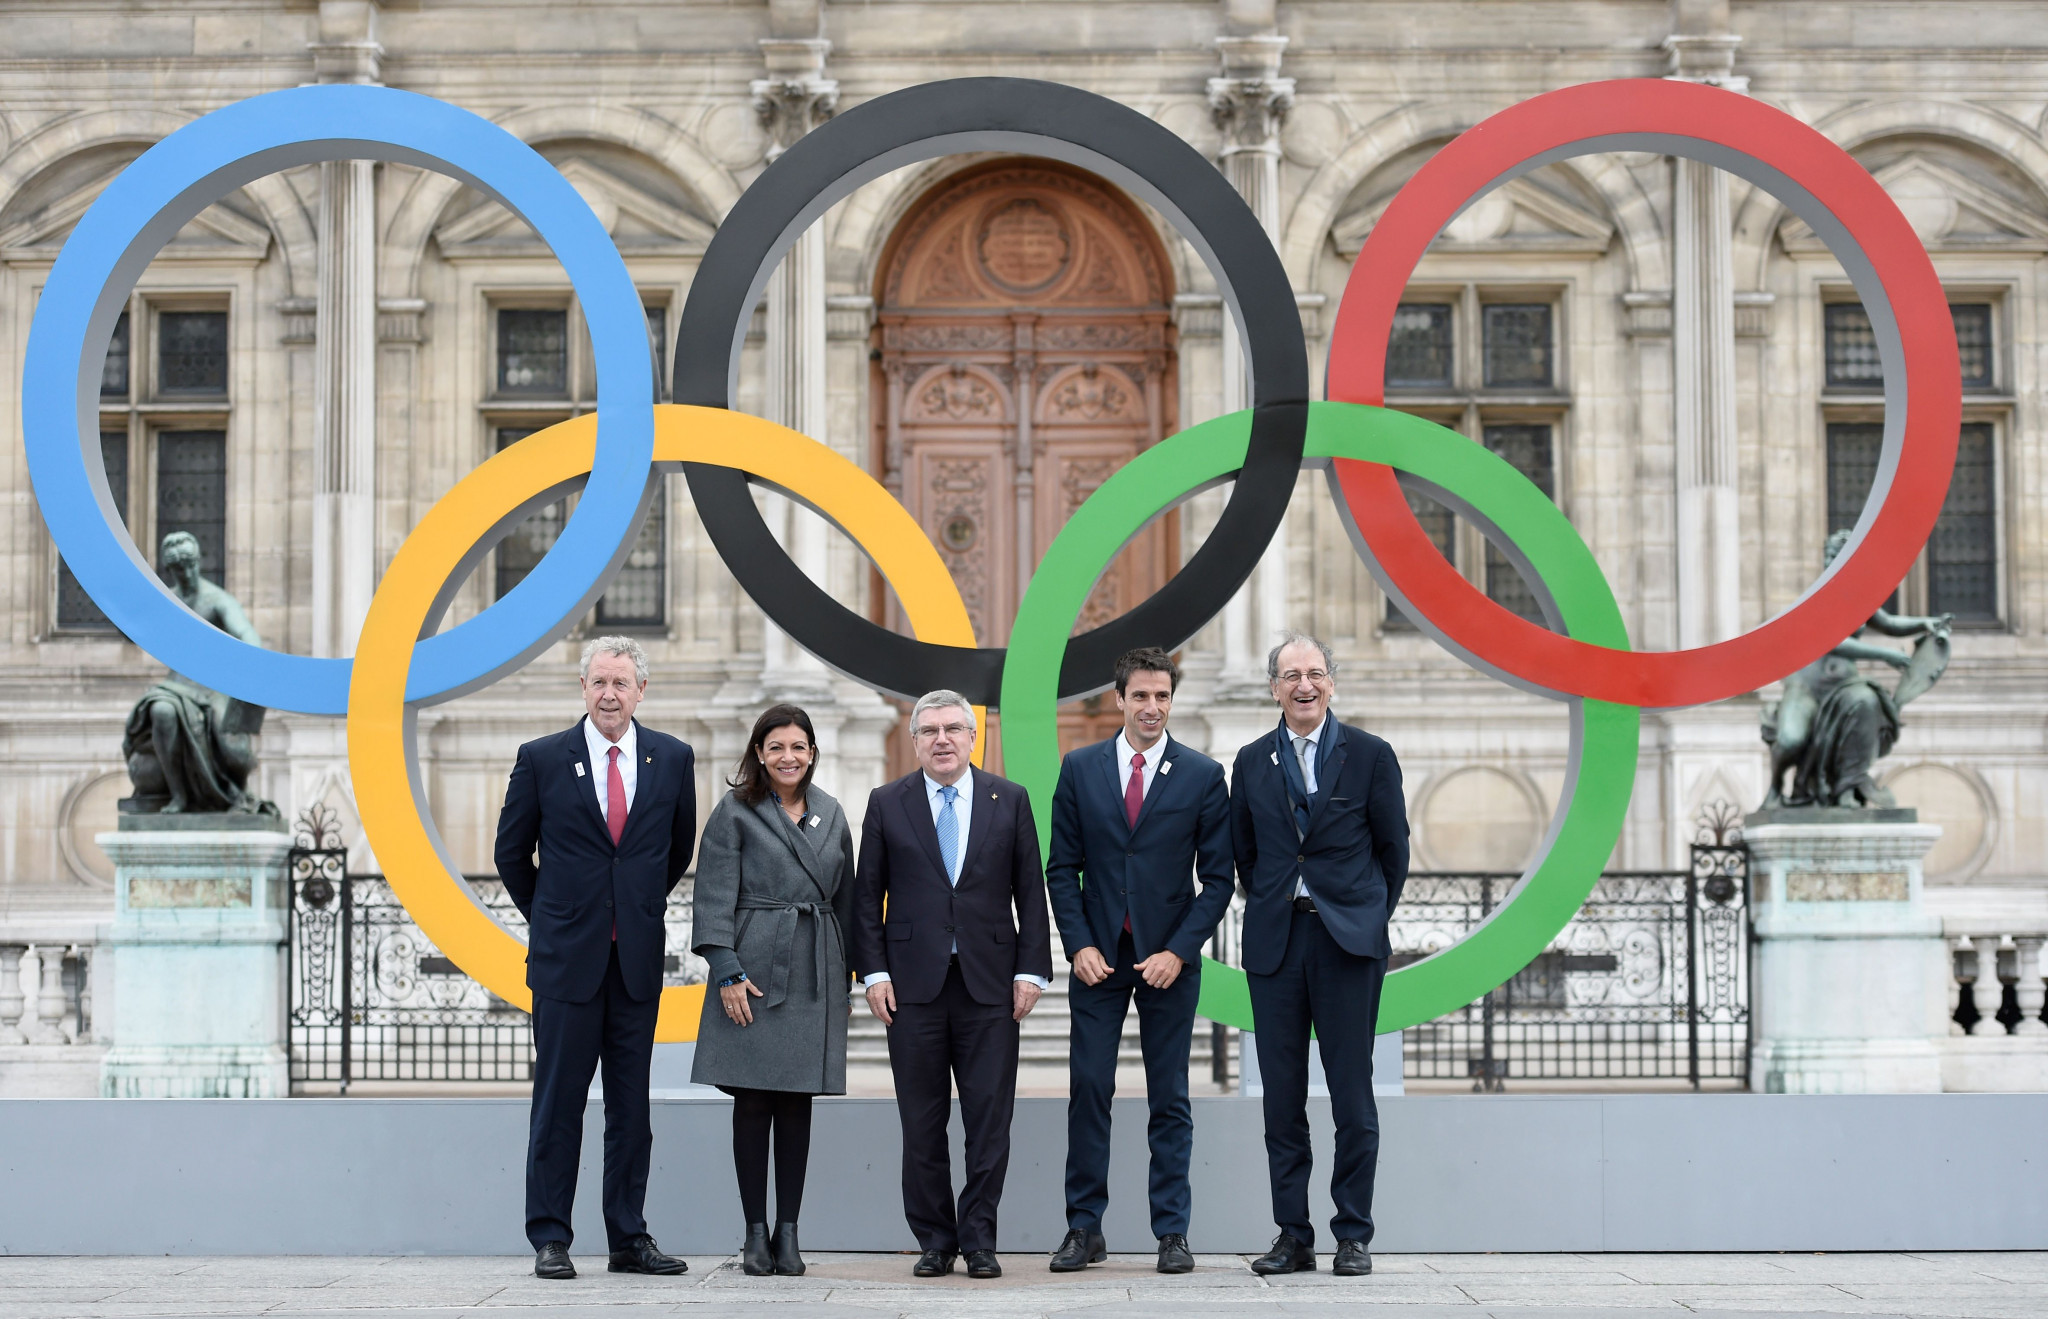 The Paris 2024 Olympics are less than one year away, and the IOC claimed the partnership with AFD offers 